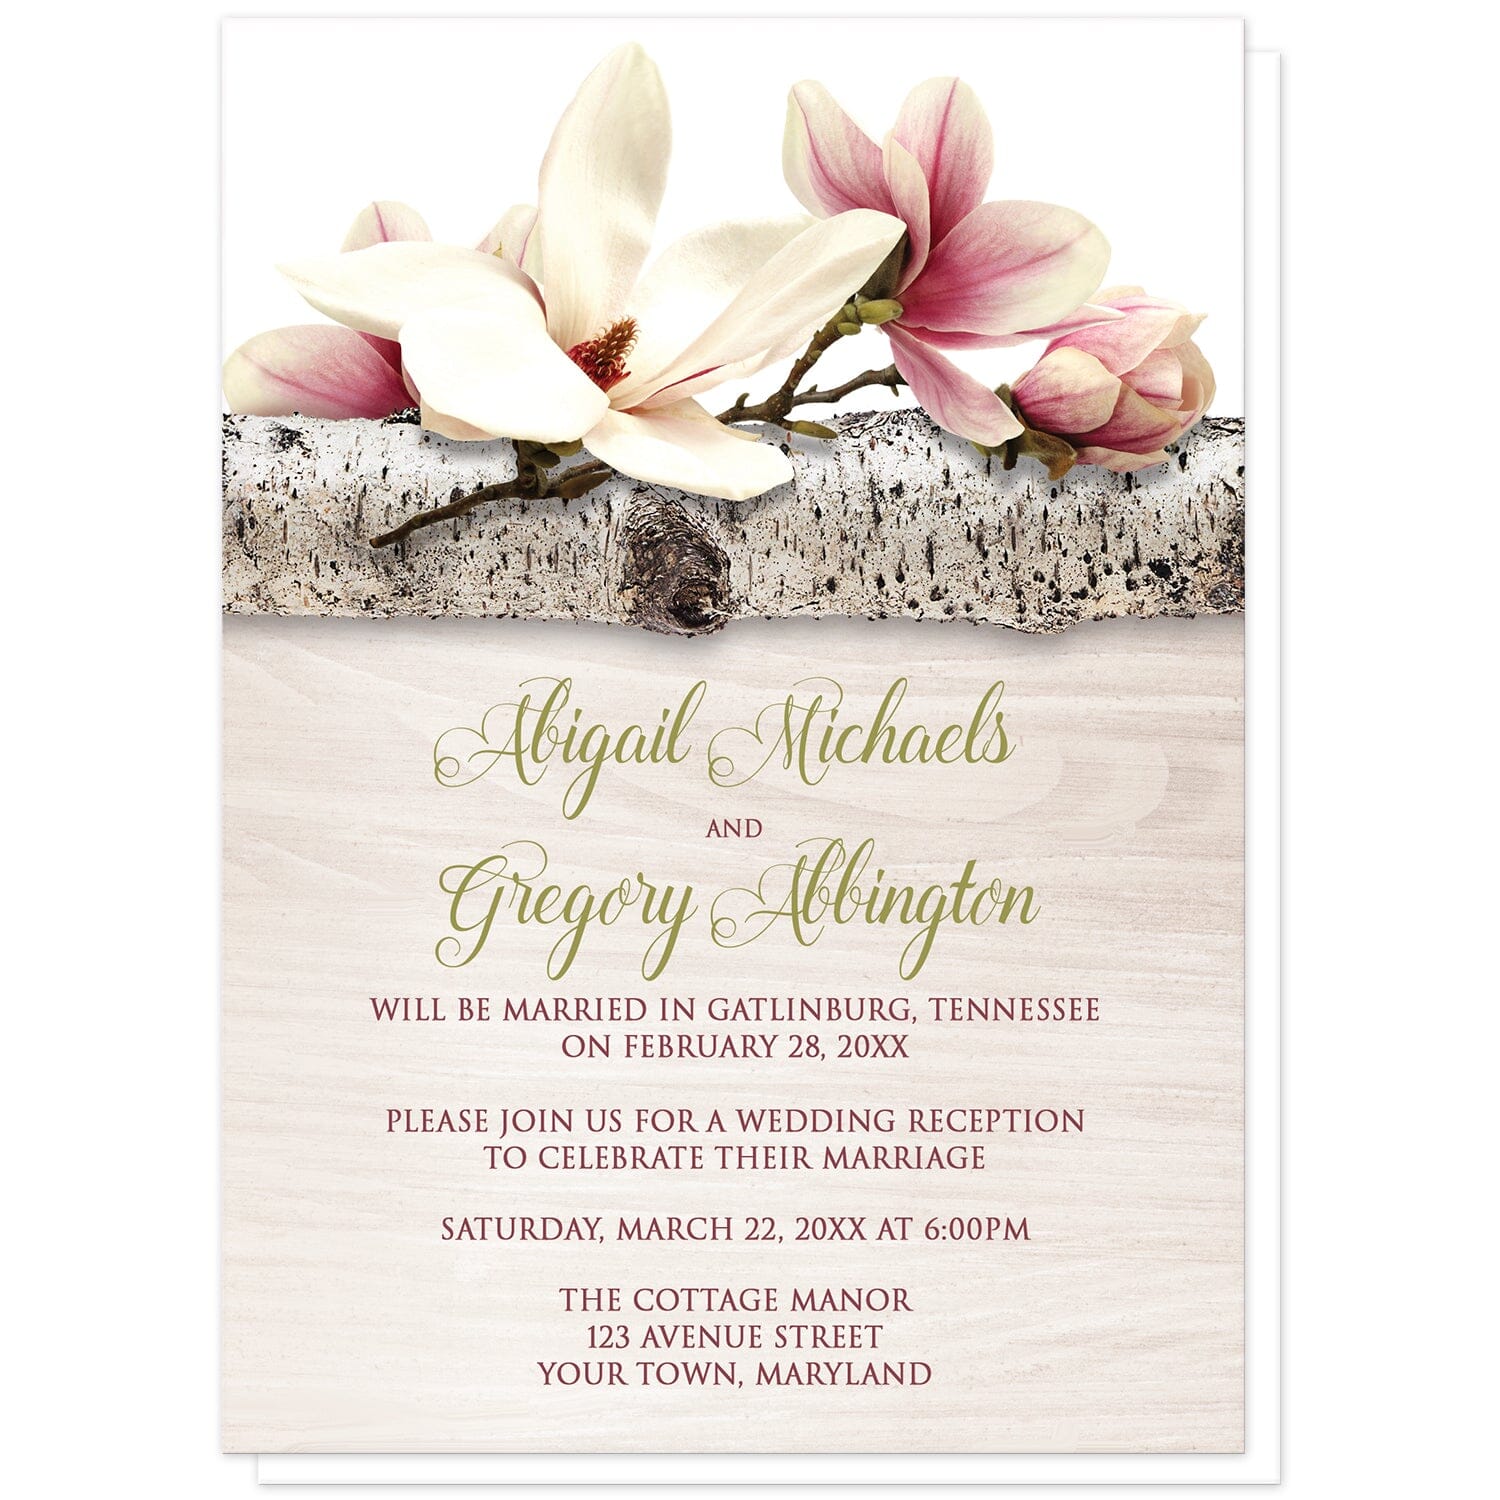 Magnolia Birch Light Wood Floral Reception Only Invitations at Artistically Invited. Beautiful magnolia birch light wood floral reception only invitations with pink and white magnolia flowers laying on a birch tree branch along the top. Your personalized post-wedding reception details are custom printed in dark pink and light olive green over a light wood background illustration.